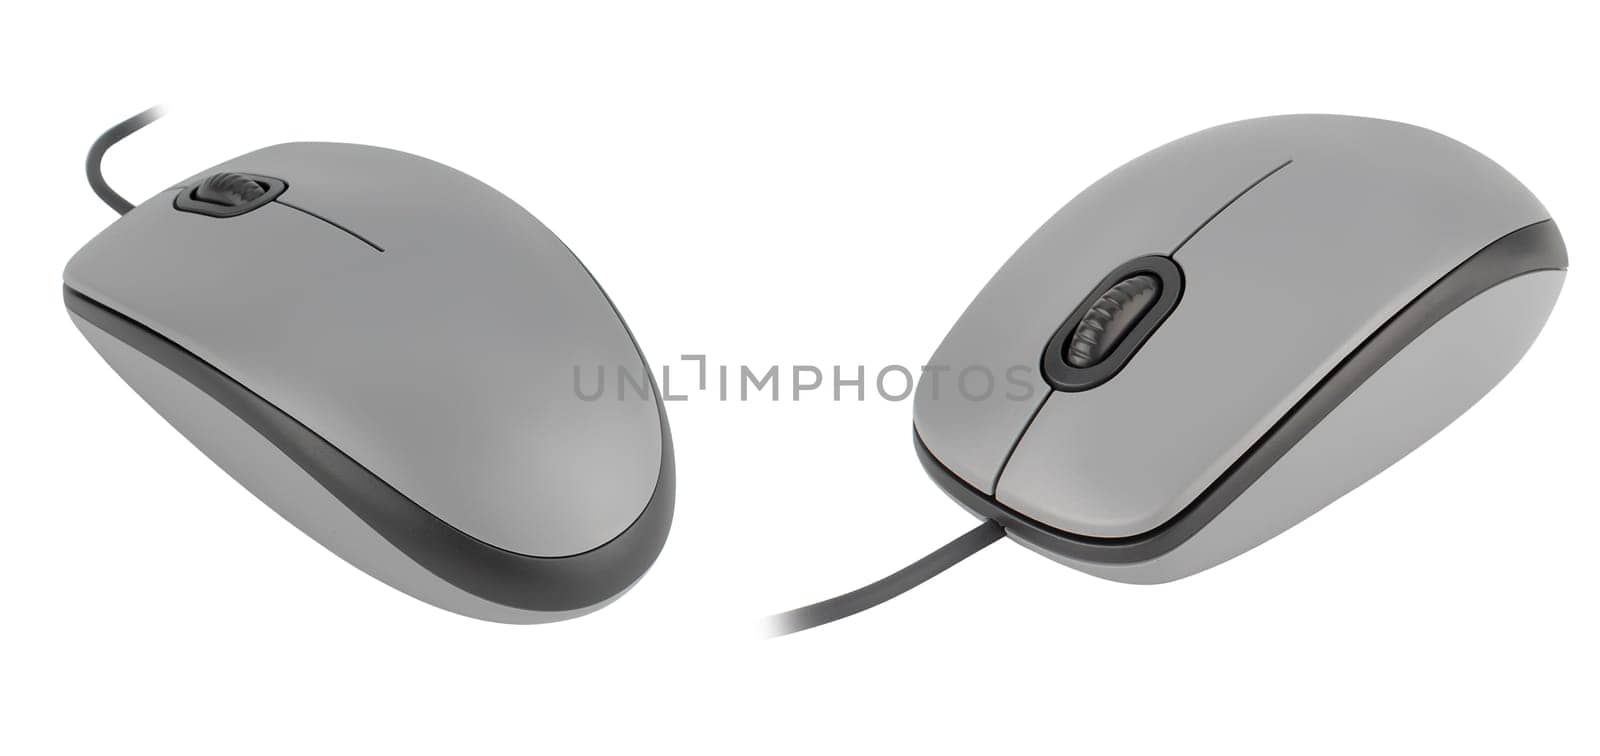 computer mouse, manipulator, on a white background in isolation by A_A